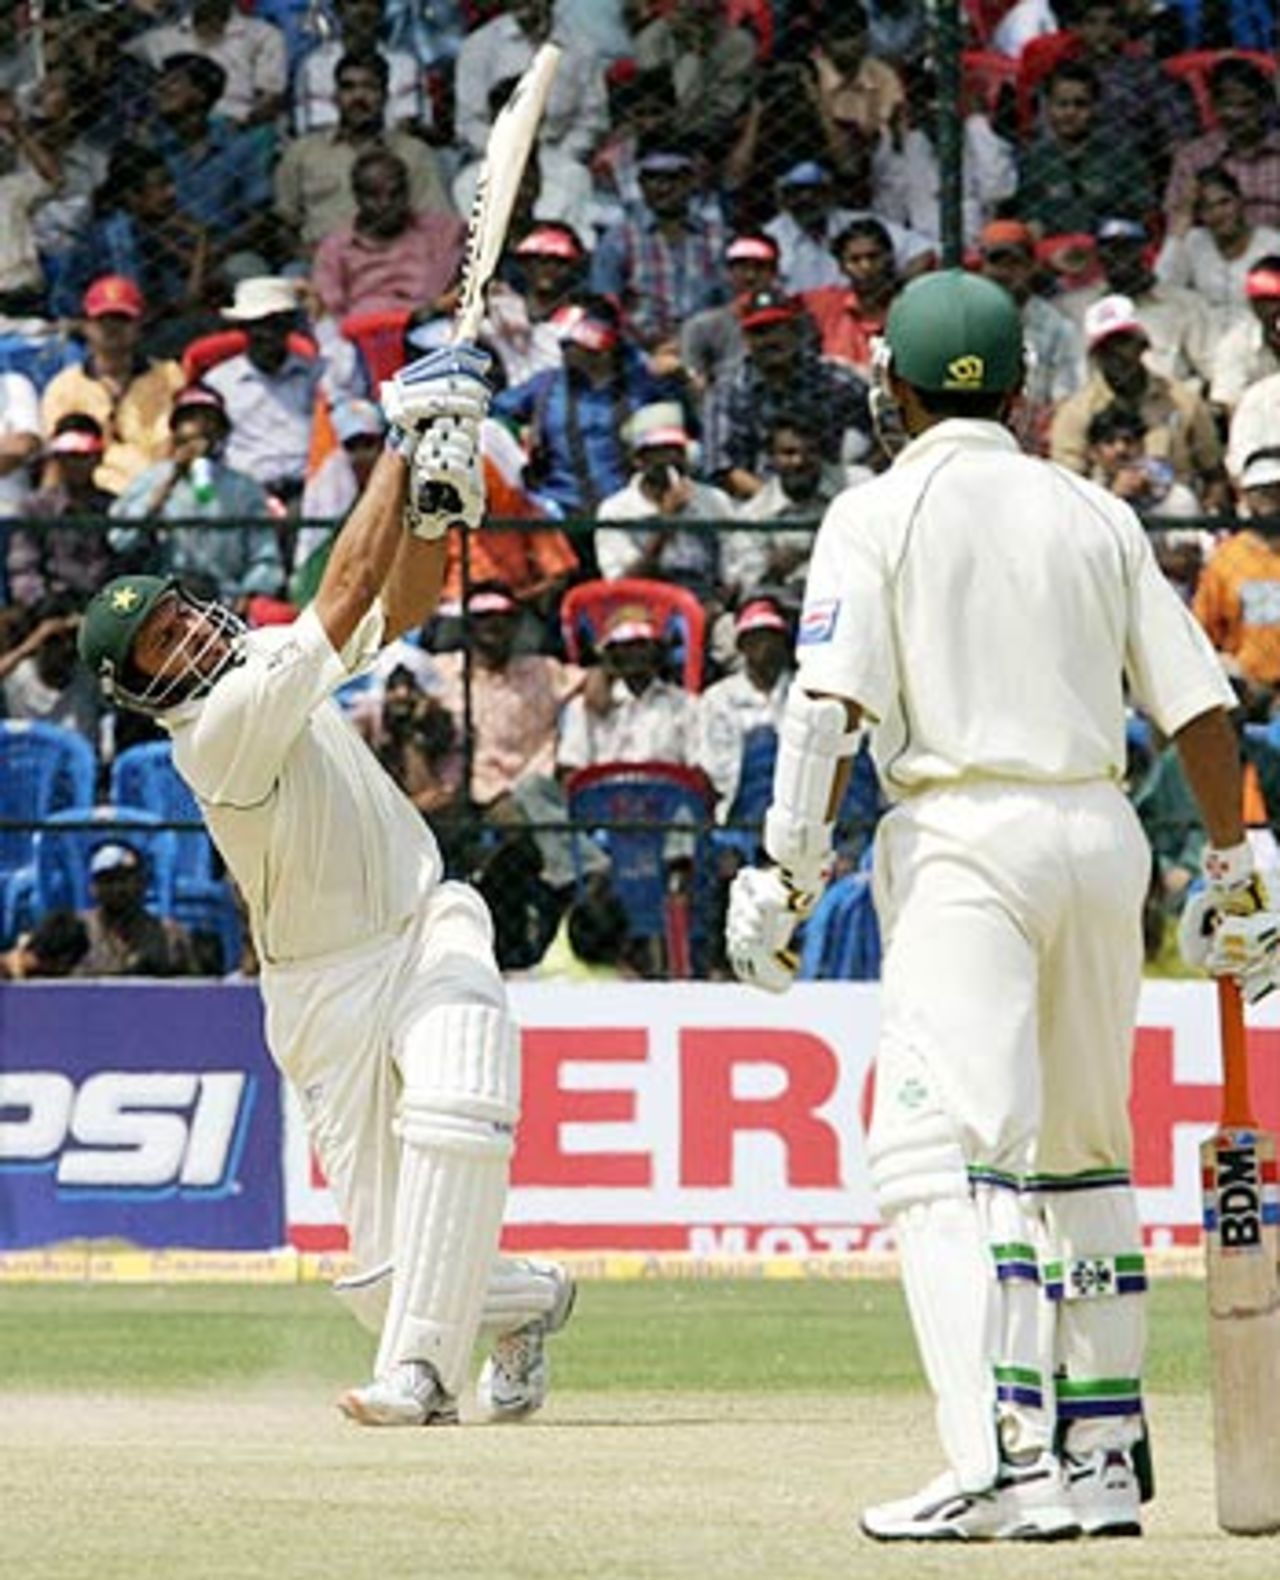 Shahid Afridi hit some scintillating shots en route to his quick-fire fifty off 26 balls, India v Pakistan, 3rd Test, Bangalore, 4th day, March 27, 2005